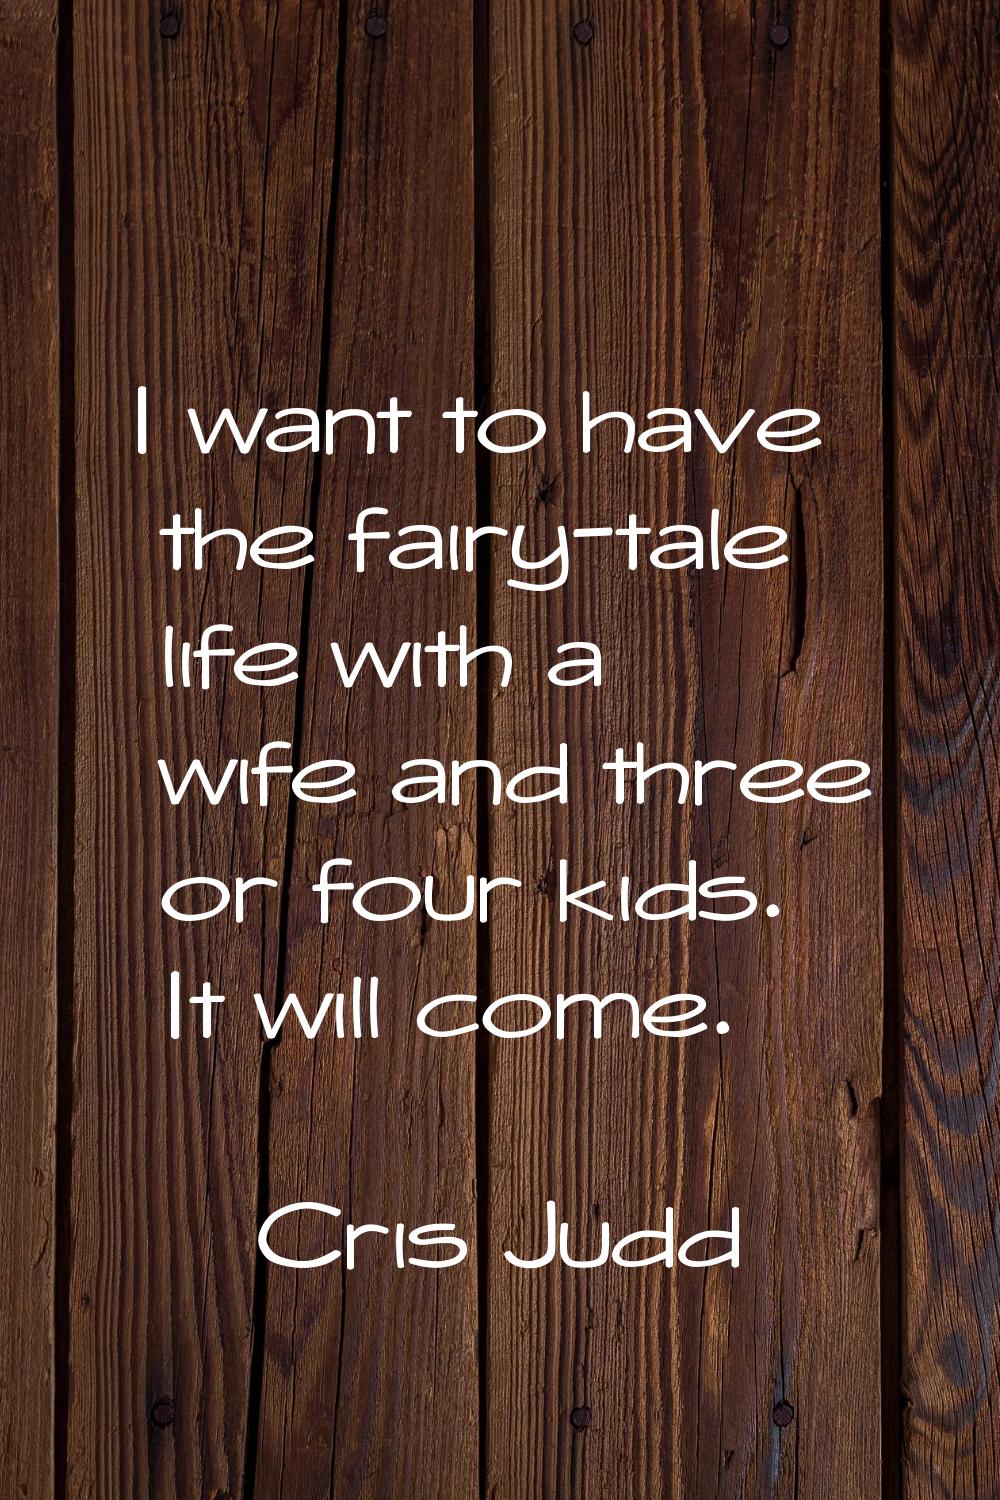 I want to have the fairy-tale life with a wife and three or four kids. It will come.